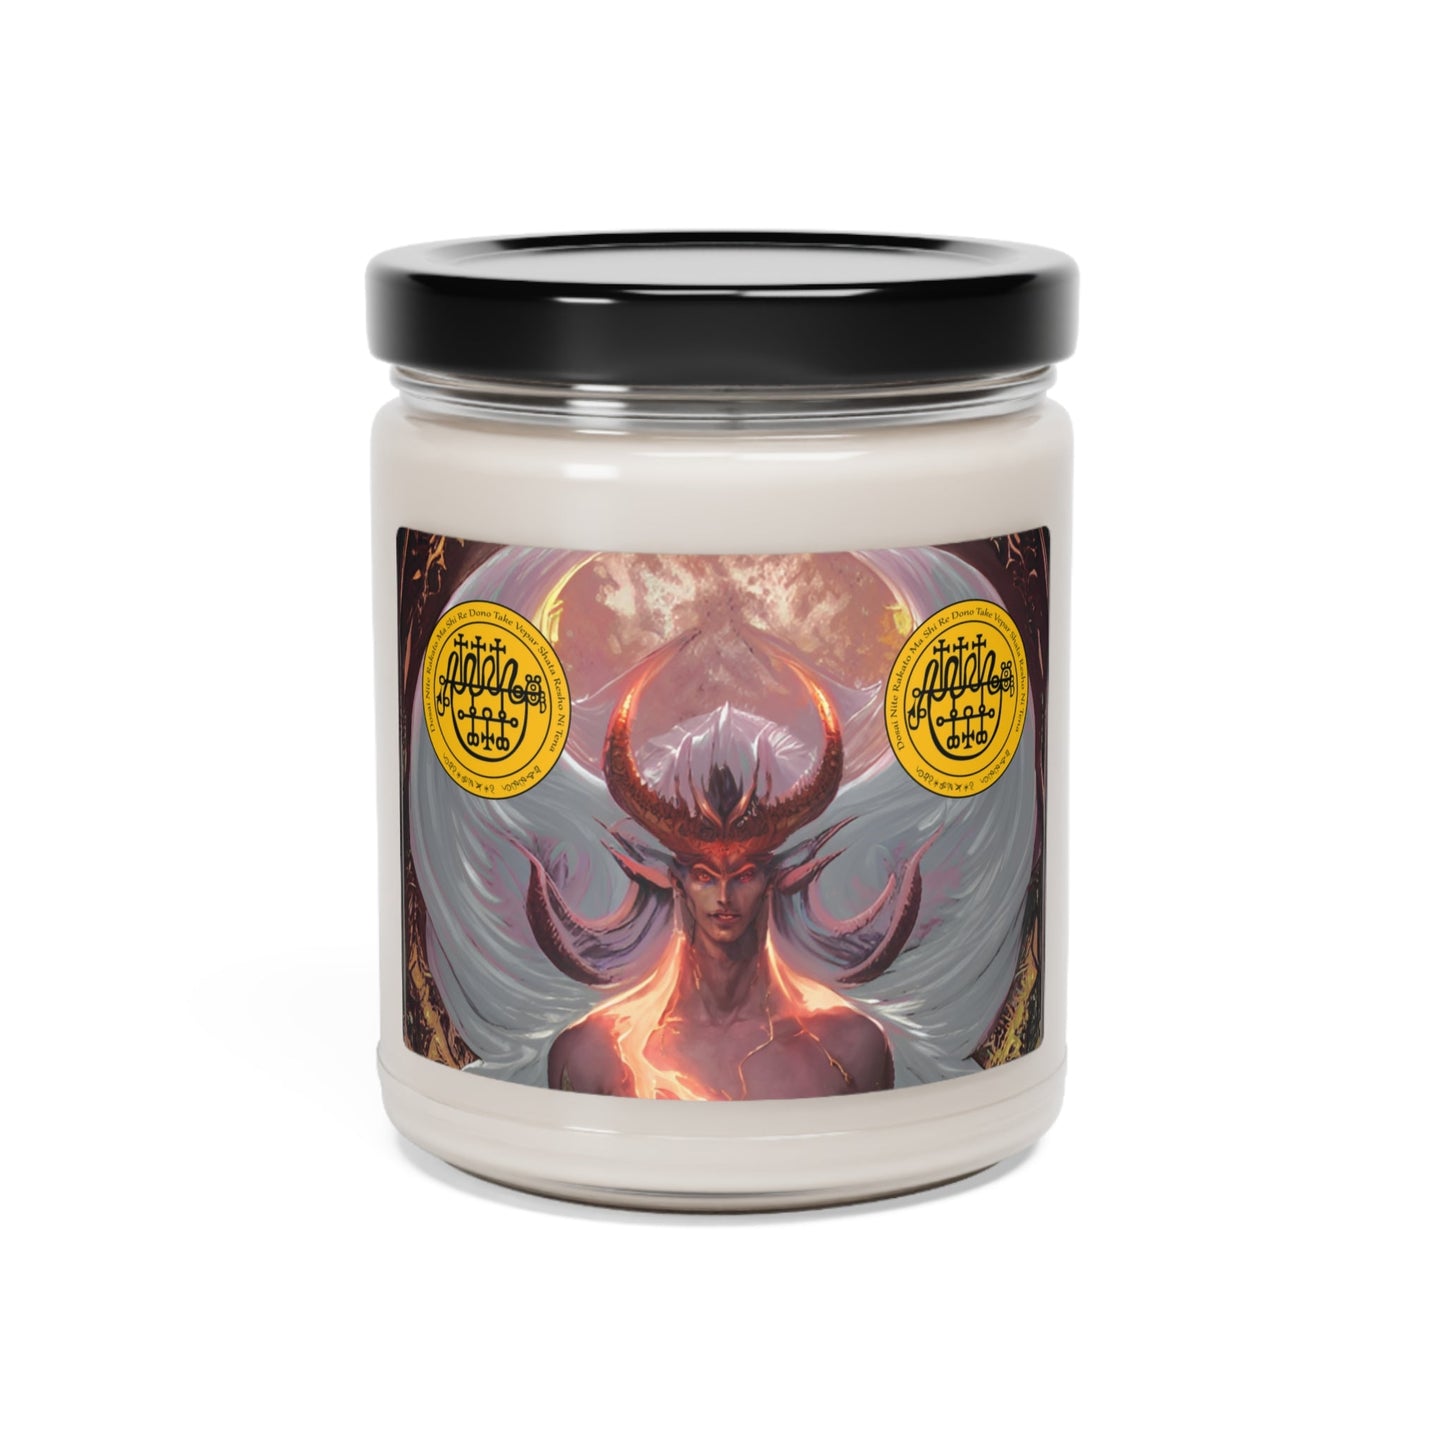 Demon-Vepar-Altar-Scented-Soy-Candle-for-offerings-rituals-initiations-o-praying-and-medtation-16